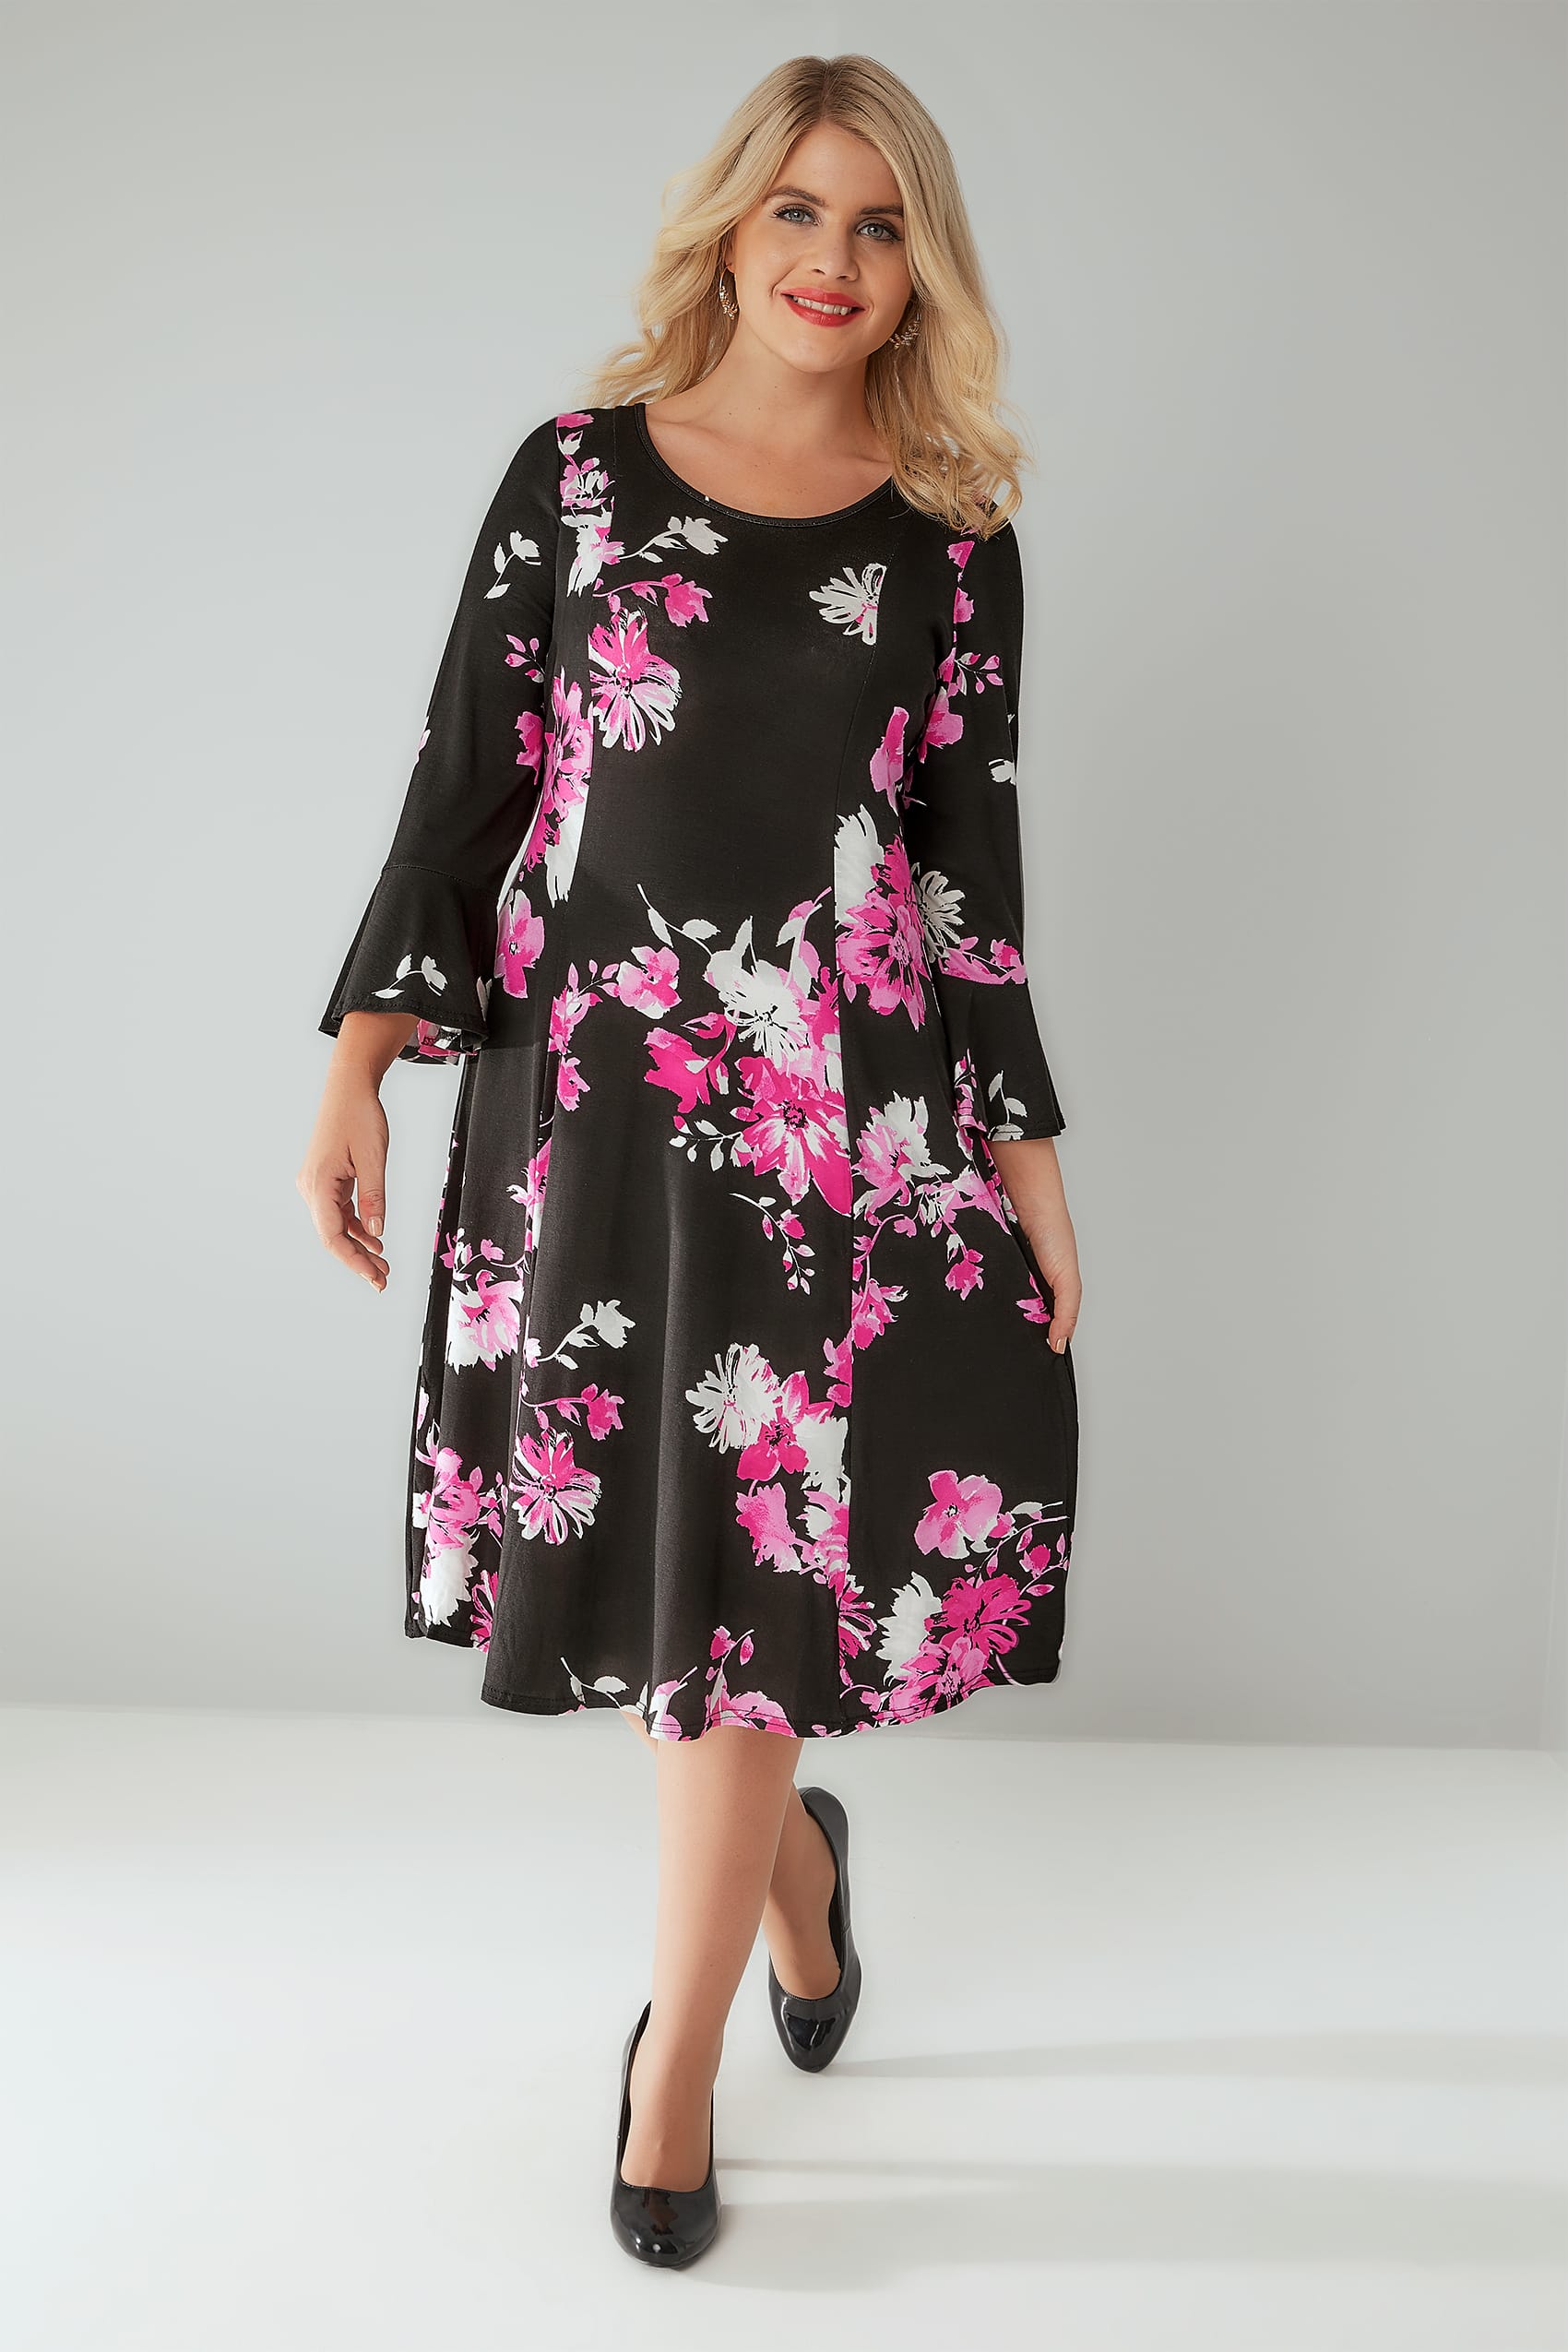 Black & Pink Floral Print Fit & Flare Jersey Dress With Flute Sleeves ...